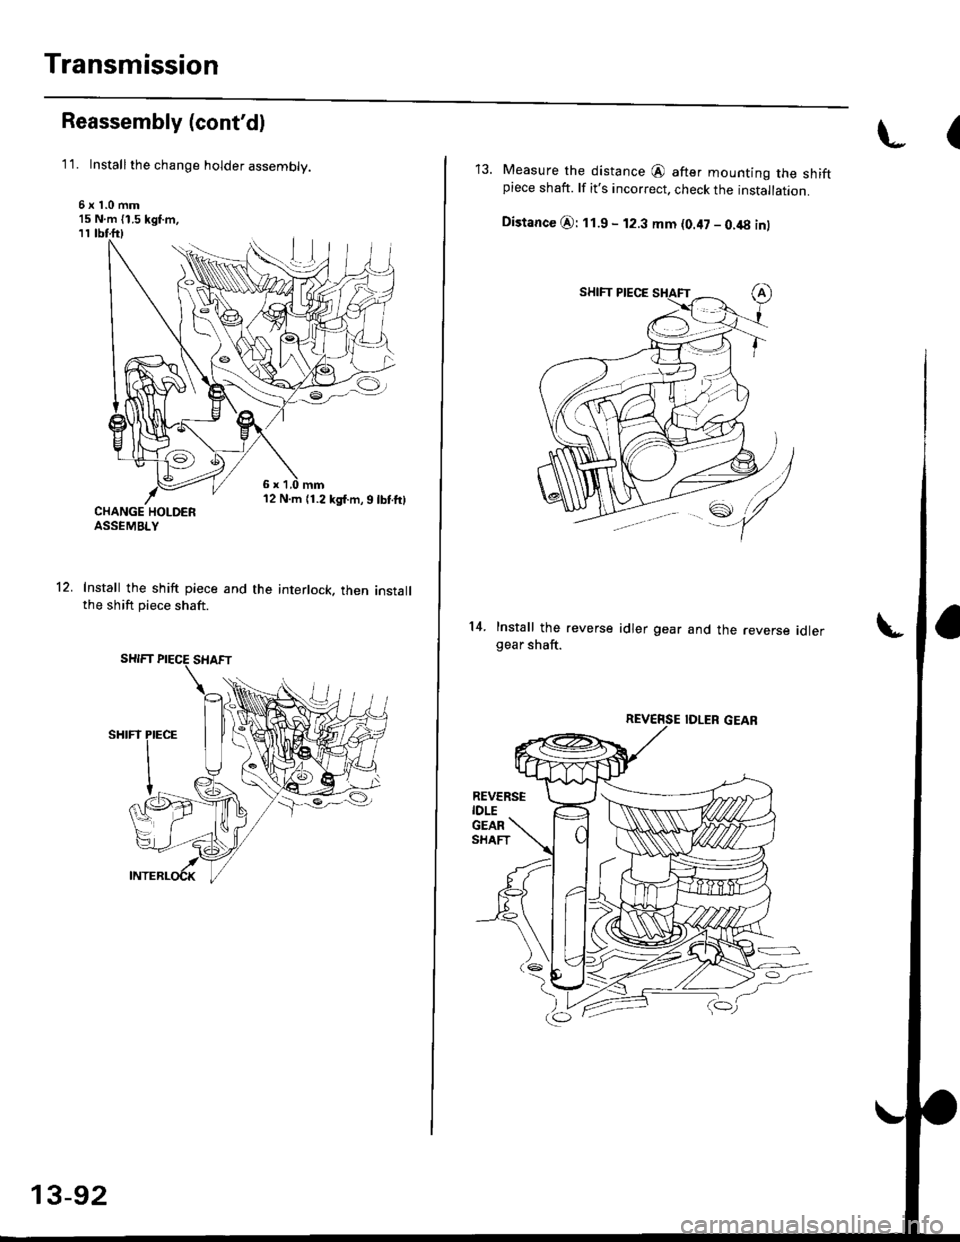 HONDA CIVIC 1996 6.G Workshop Manual Transmission
Reassembly (contd)
11. Installthe change holder assembly.
6x1.0mm15 N.m {1.5 kgf.m,
12 N.m {1.2 kgf.m,9lbtftlCHANGE HOLDERASSEMBLY
Install the shift piece and the interlock. then install